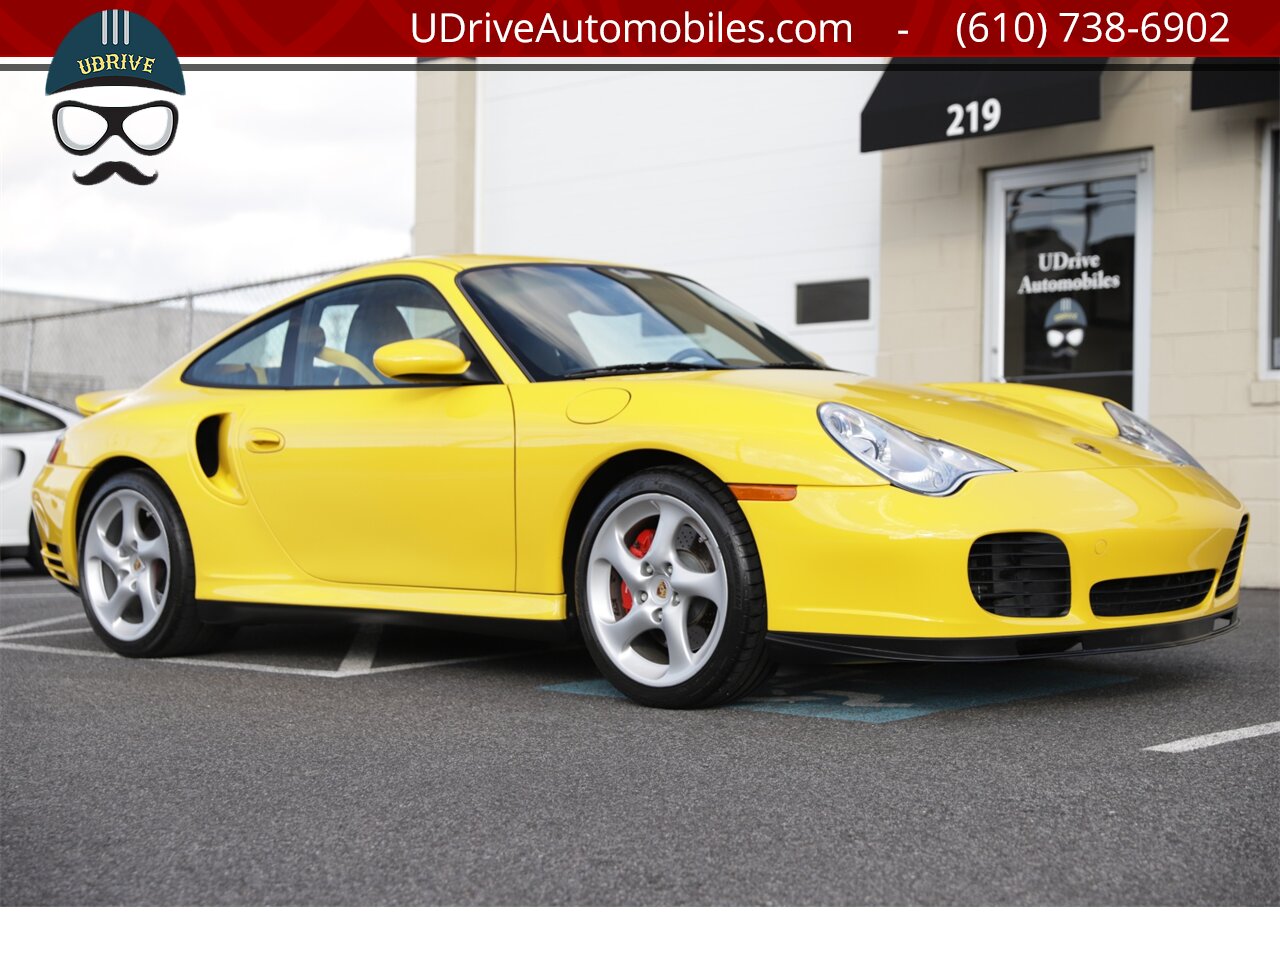 2001 Porsche 911 Turbo 996 6 Sp PTS Ferrari Giallo Modena  FULL Carbon Pkg 1 of a Kind Paint to Sample - Photo 13 - West Chester, PA 19382